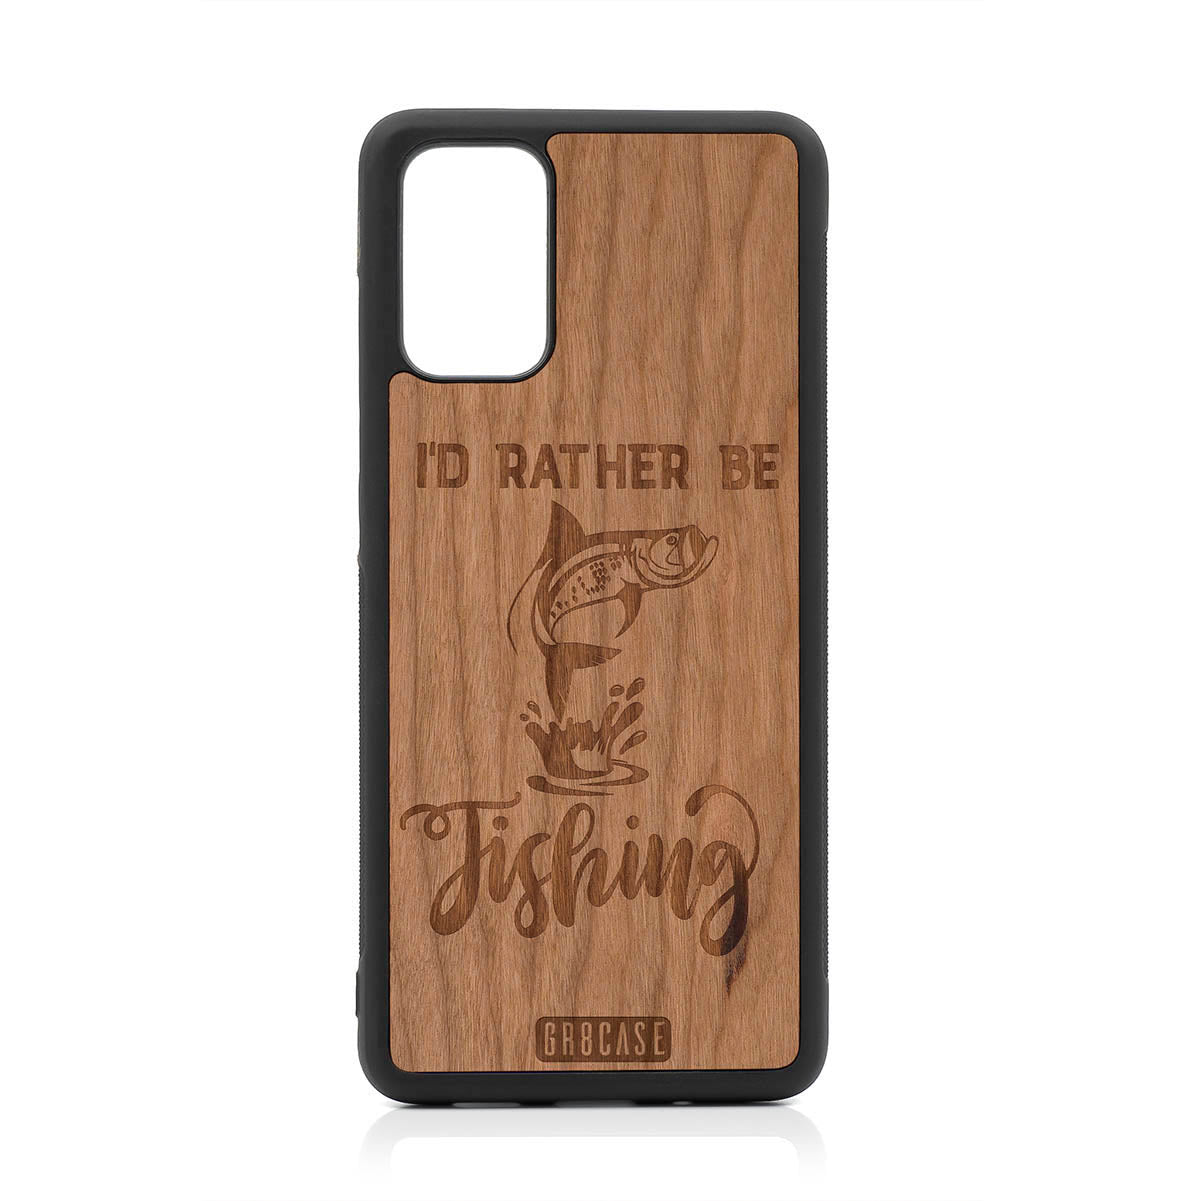 I'D Rather Be Fishing Design Wood Case For Samsung Galaxy S20 Plus